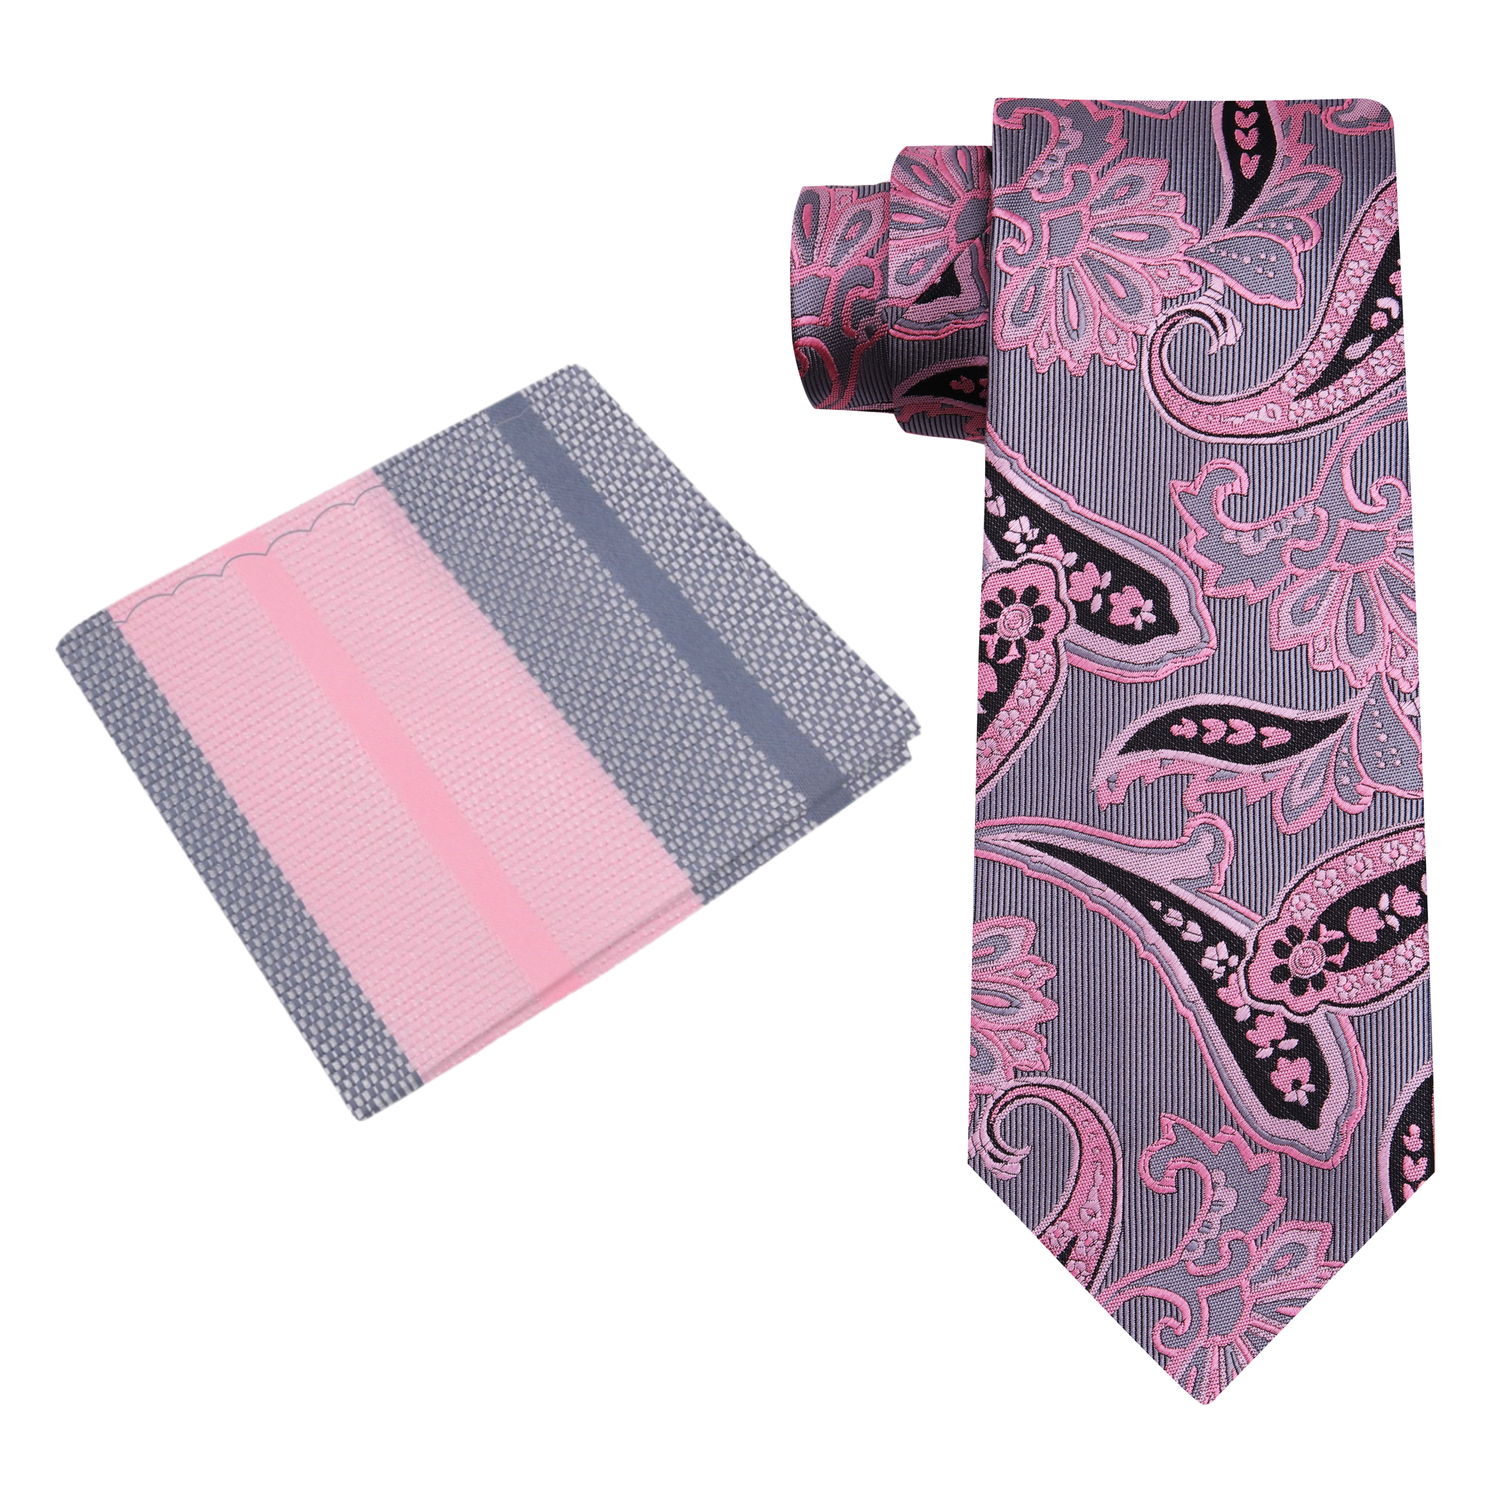 View 2: Silver Pink Salmon Paisley Tie and Pink Grey Stripe Square